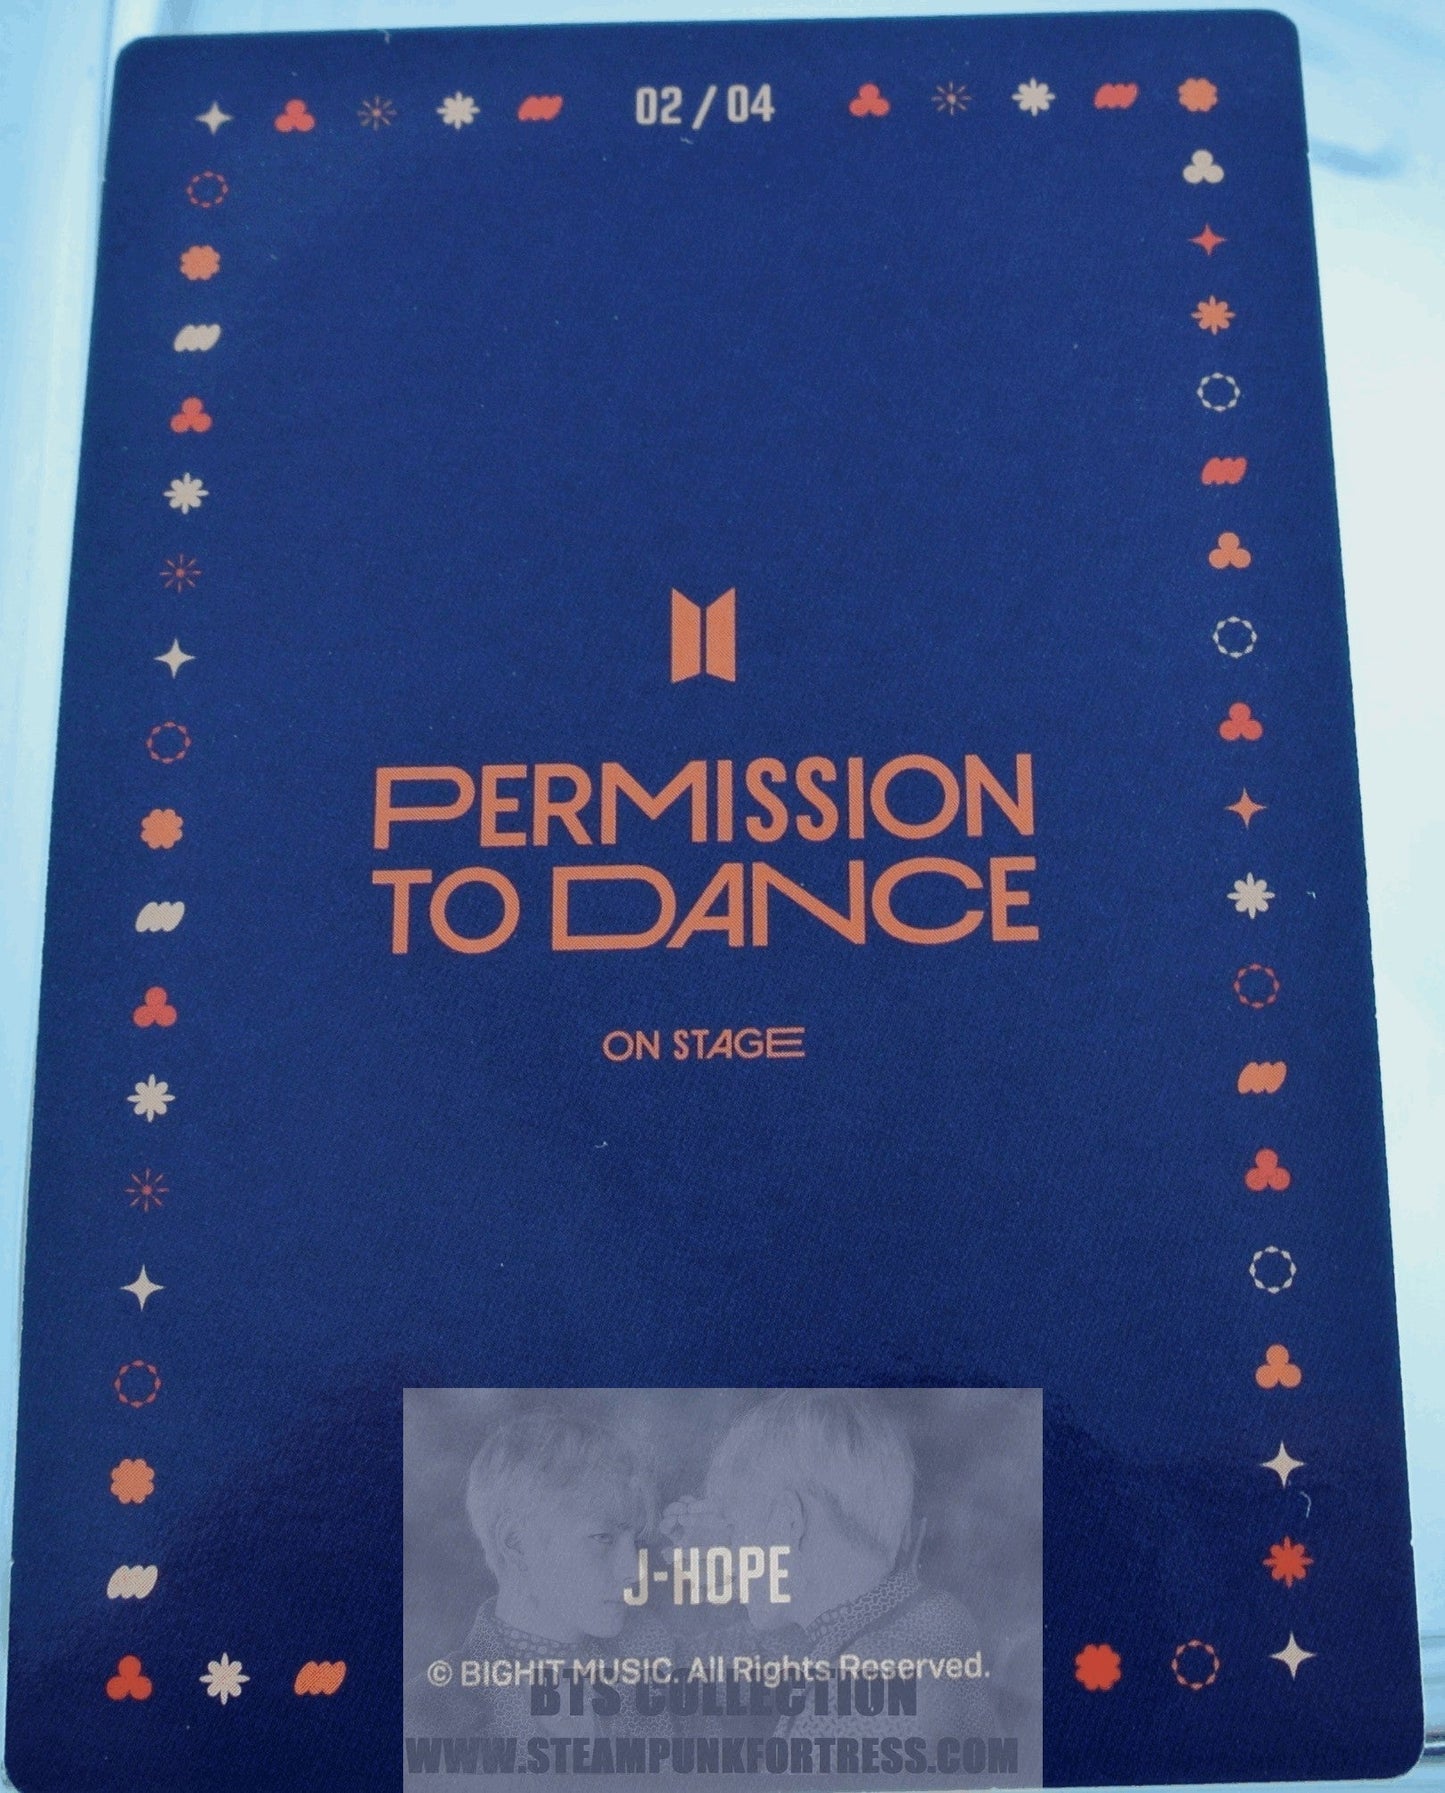 BTS J-HOPE JUNG HOSEOK HO-SEOK JHOPE 2022 PERMISSION TO DANCE ON STAGE SEOUL PTD #2 OF 4 PHOTOCARD PHOTO CARD NEW OFFICIAL MERCHANDISE